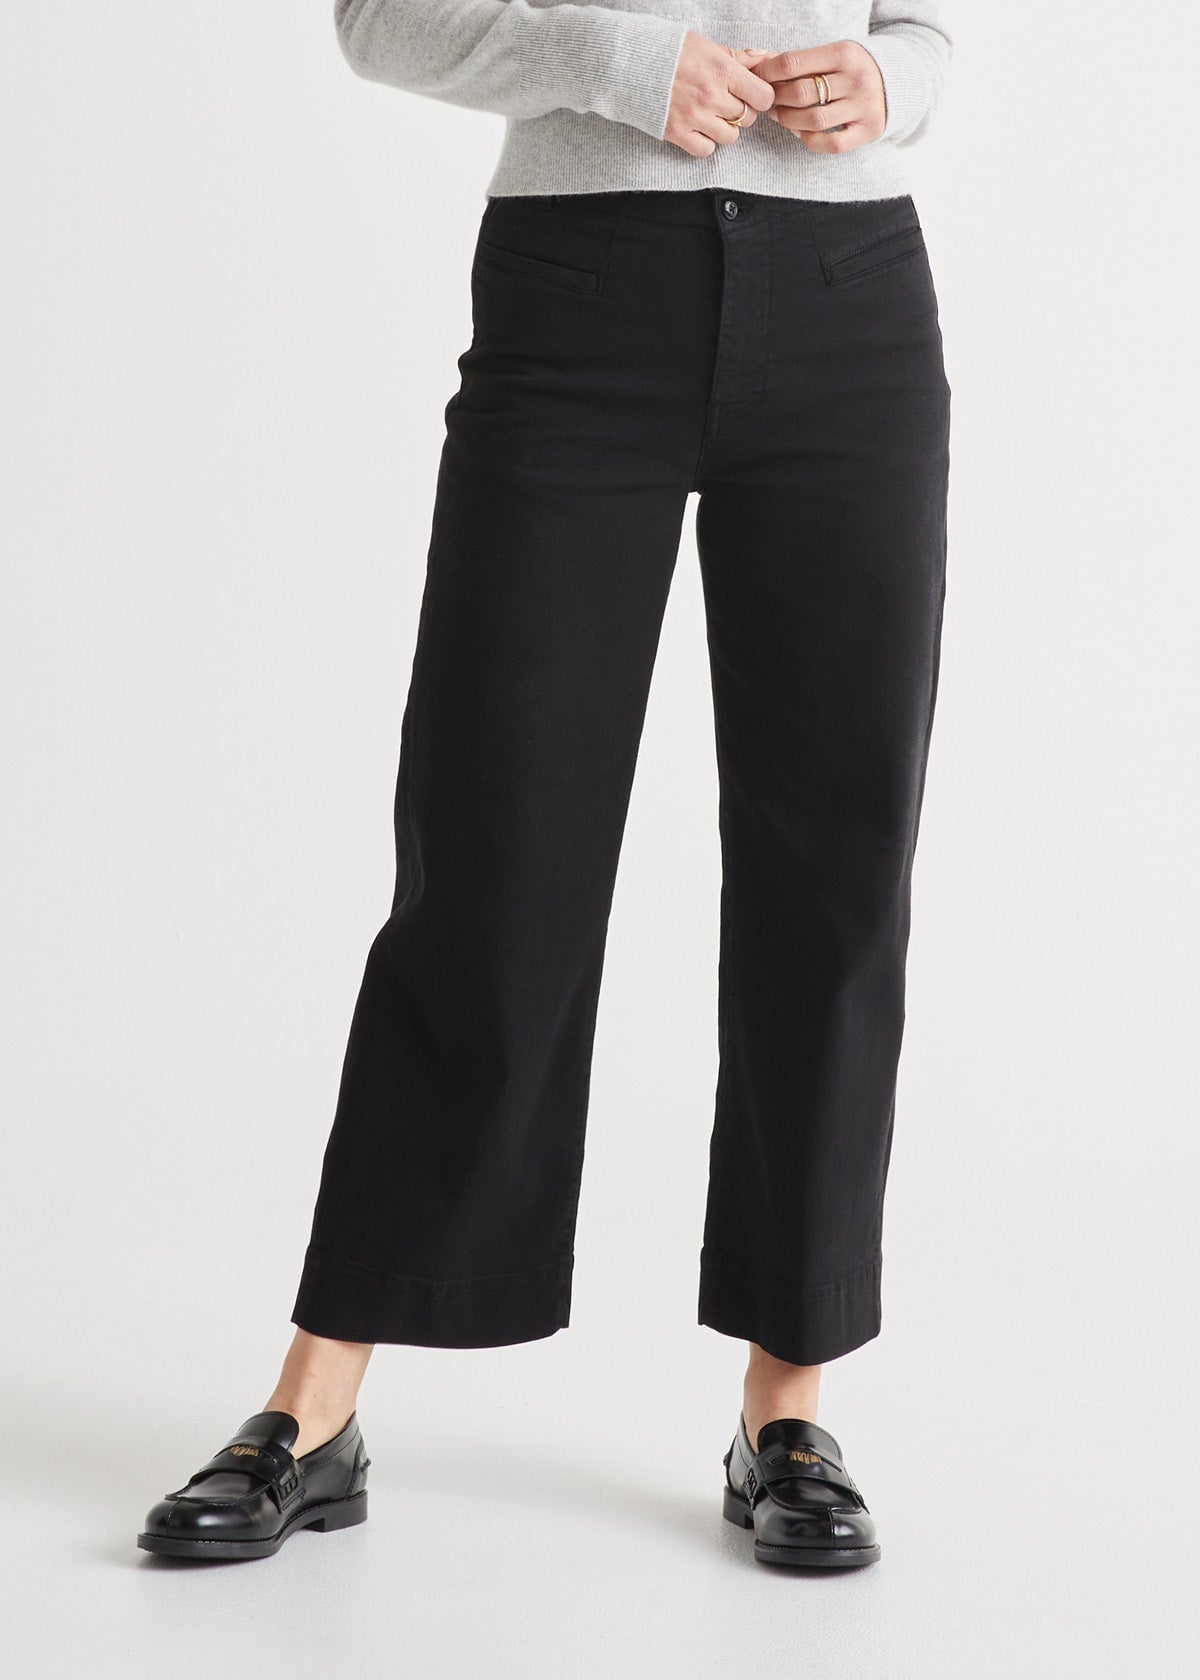 Women's black high rise cropped trouser front